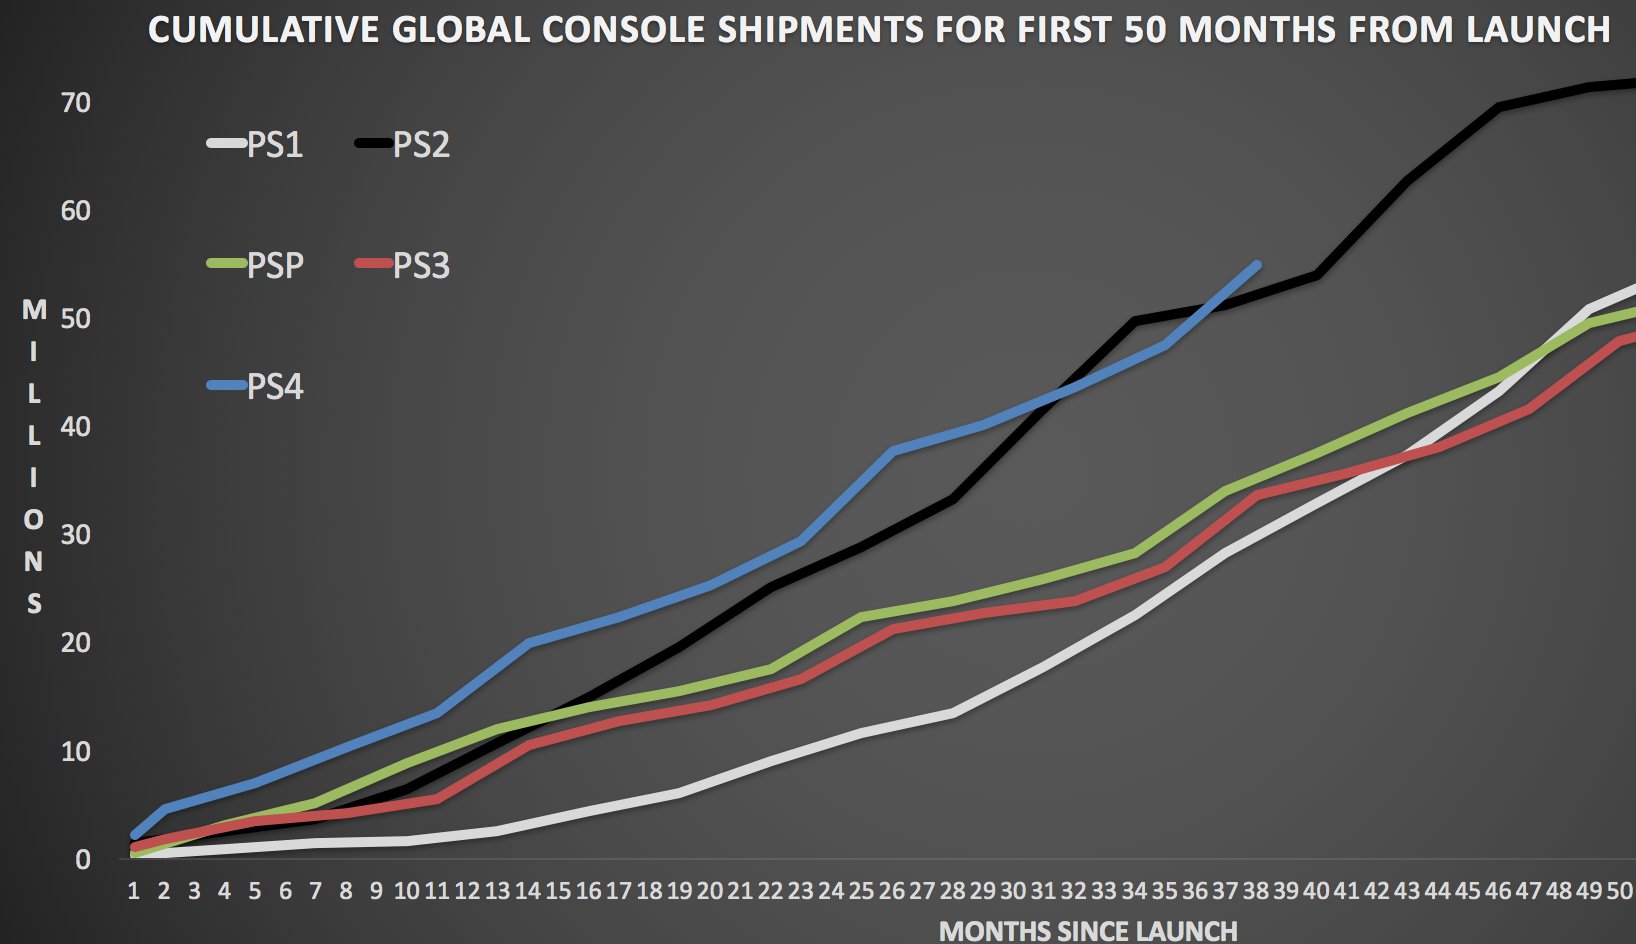 number of xbox one sold